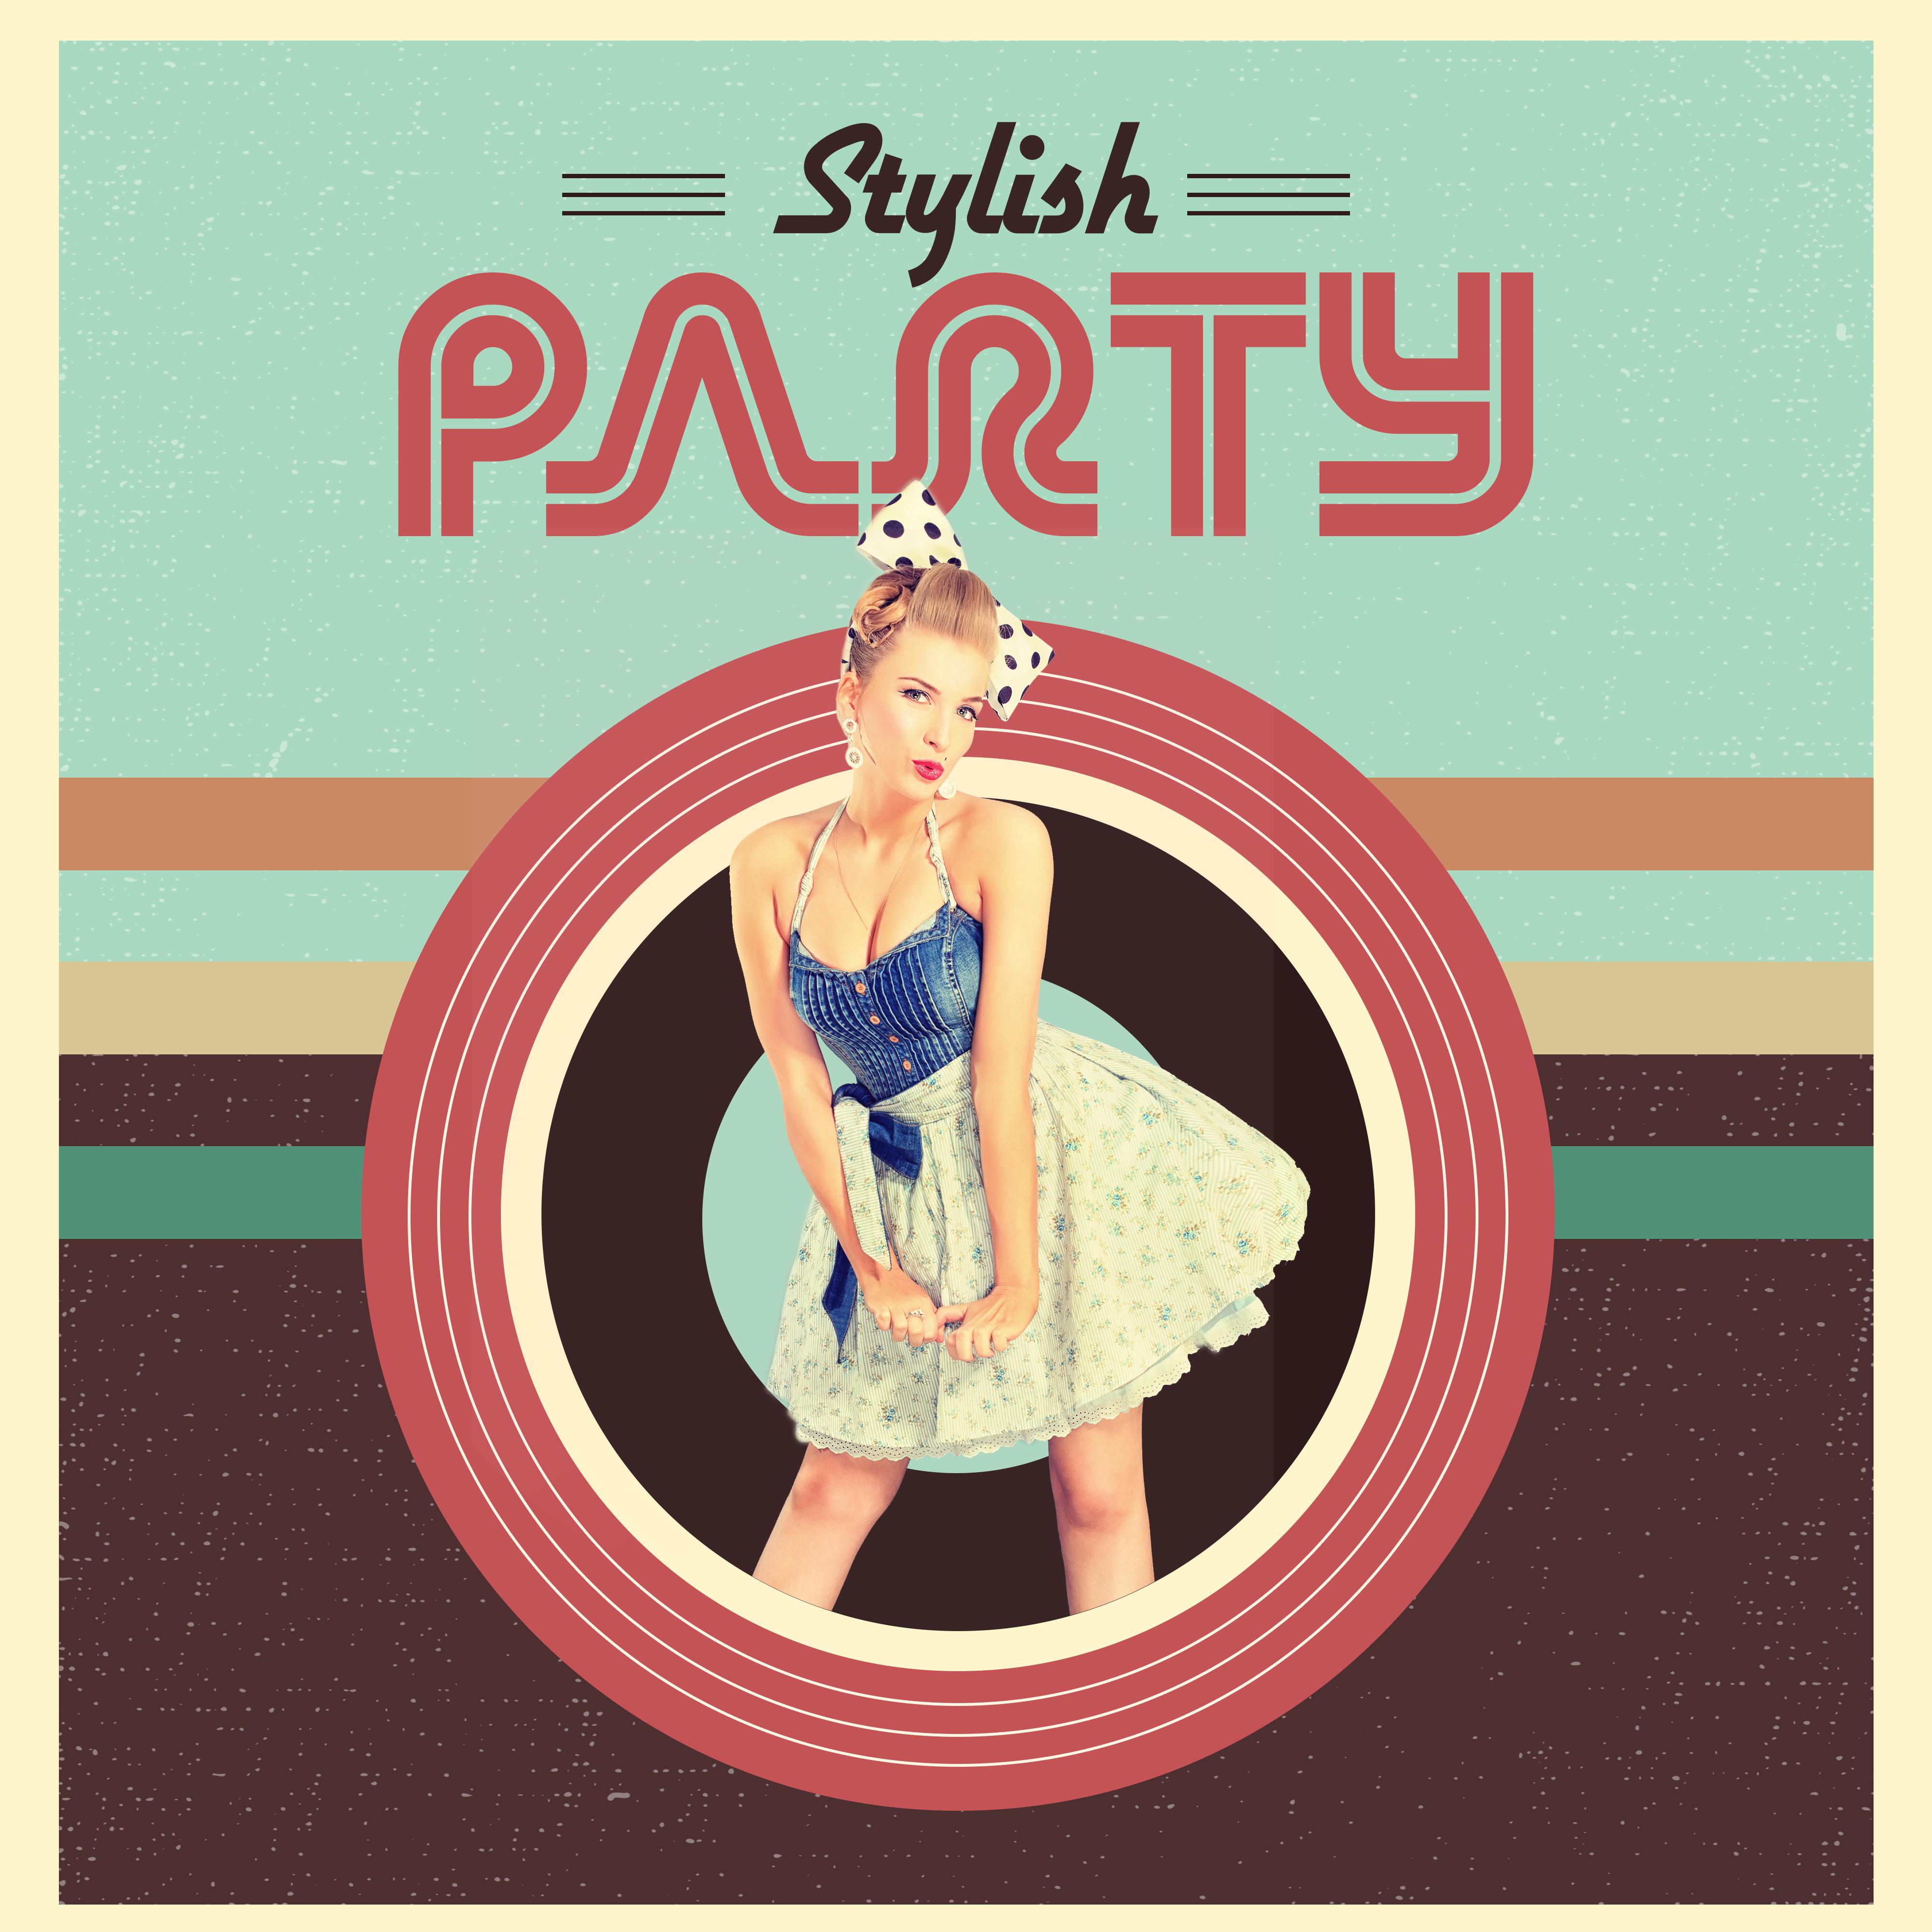 Stylish Party - Retro Instrumental Jazz Music for Elegant Parties, Pin-Up, Retro or Last Century Party (From the 1920s Onwards)